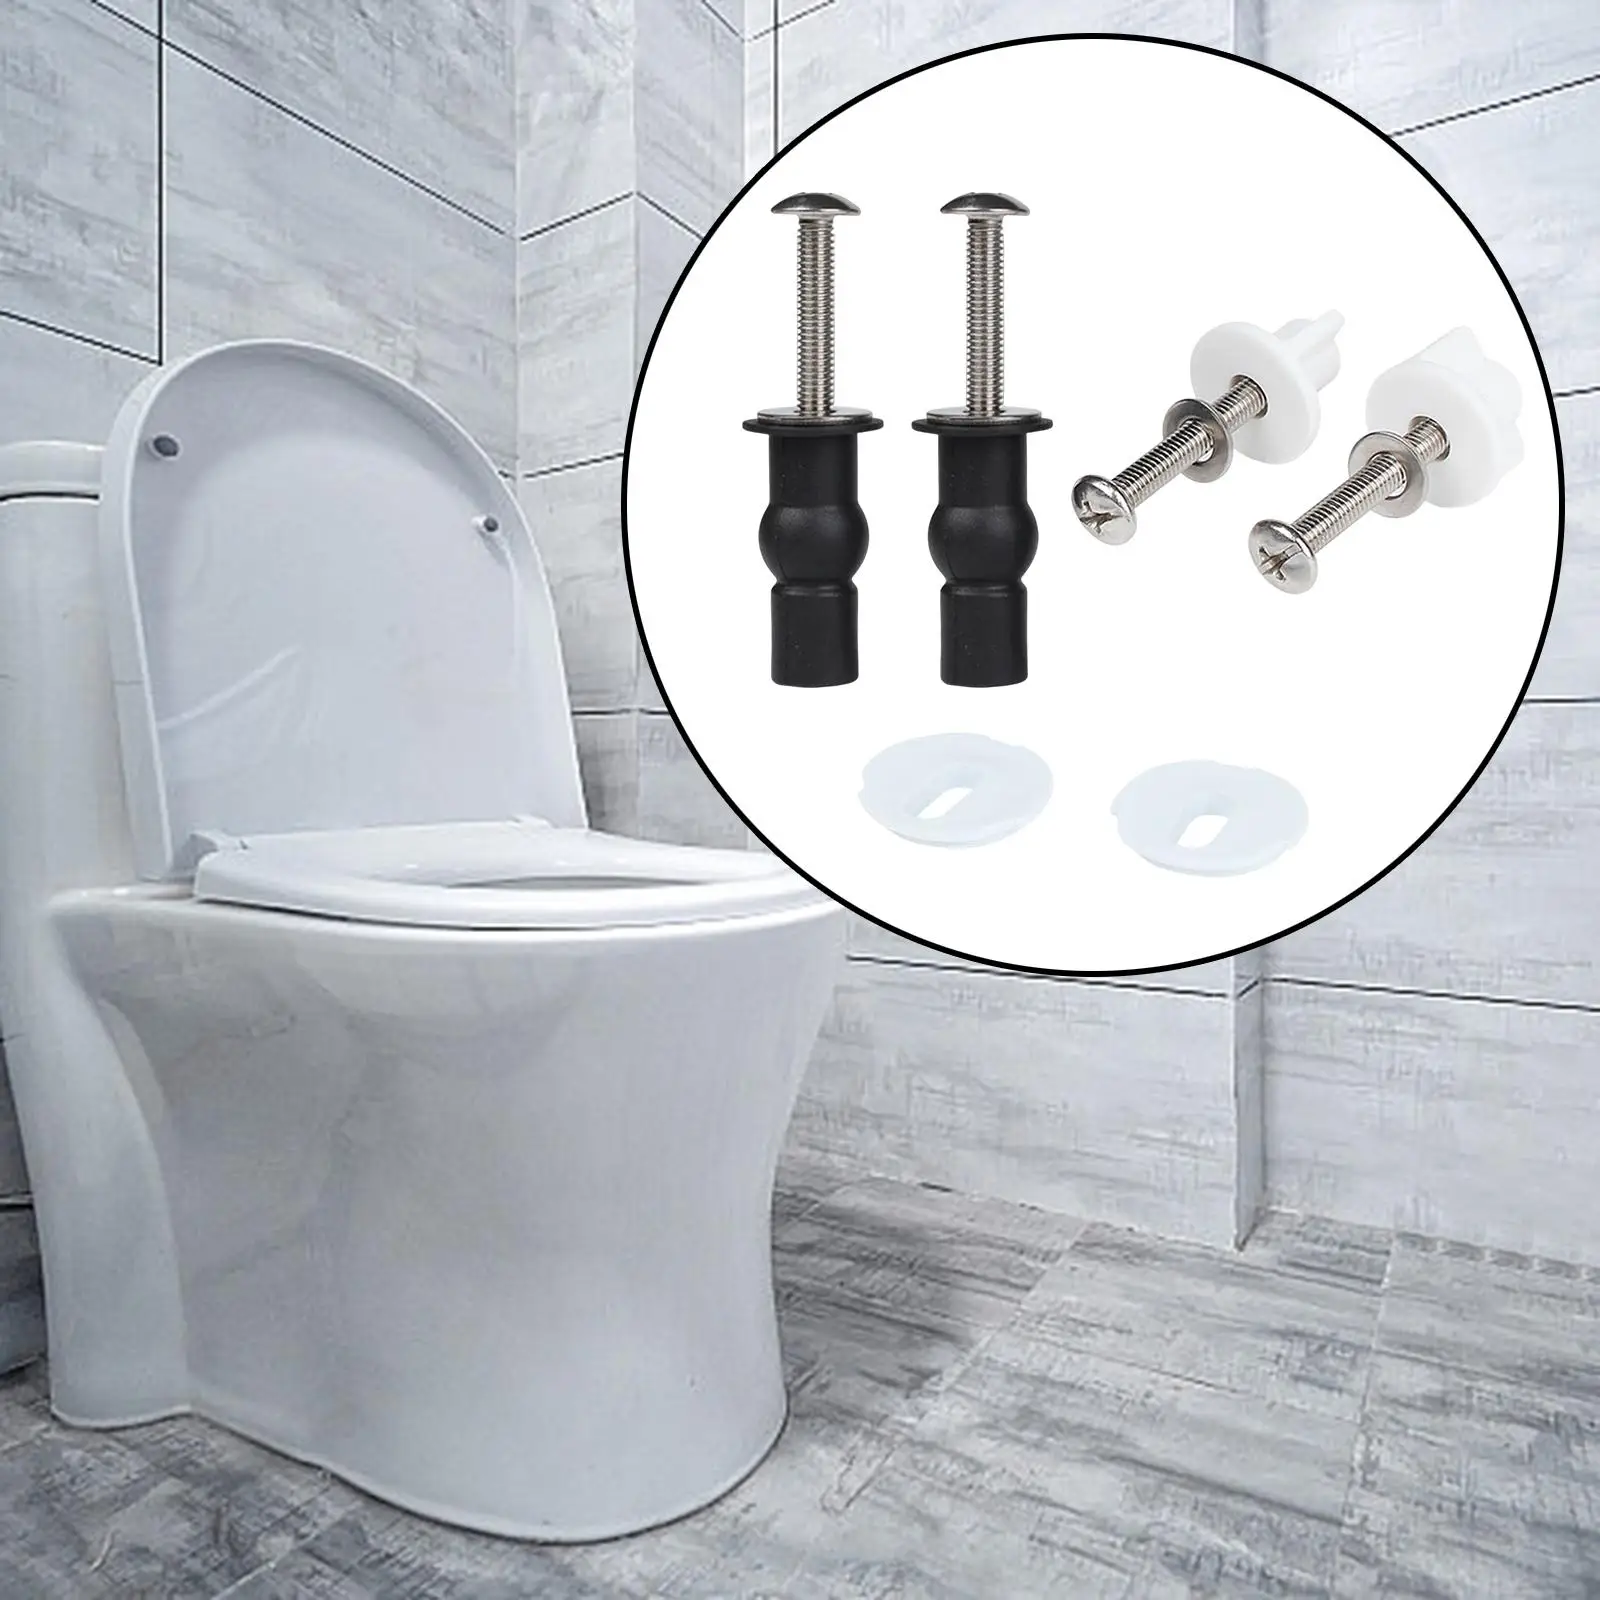 2 Pieces Toilet Seat Screws Bolts Bathroom Toilet Repair Screw with Rubber Washers and Wing Nuts Top Mounted Toilet Seat Hinges